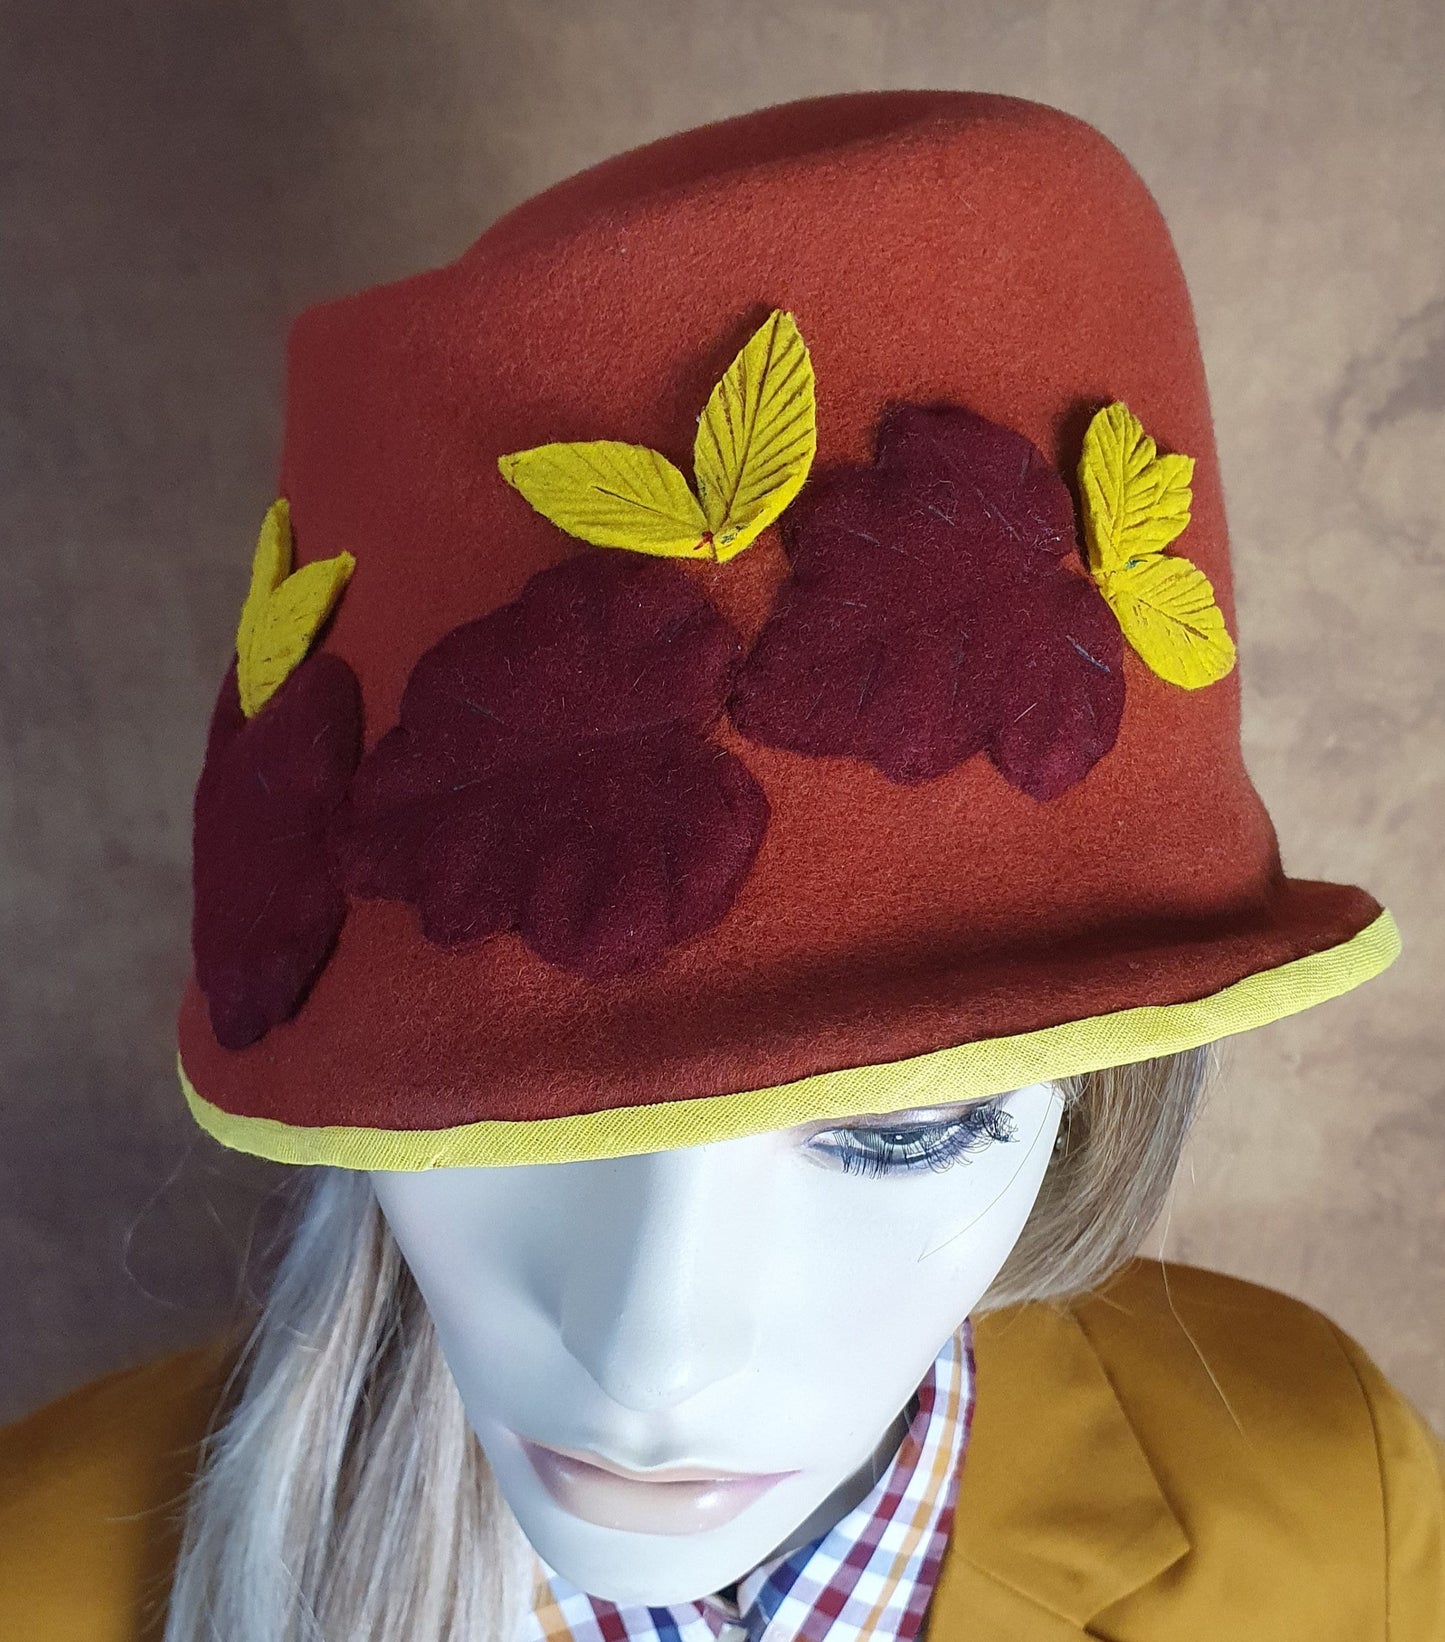 Felt hat, handmade in the color orange. For ladies, with autumn leaves. Perfect for autumn &amp; winter and special occasions.